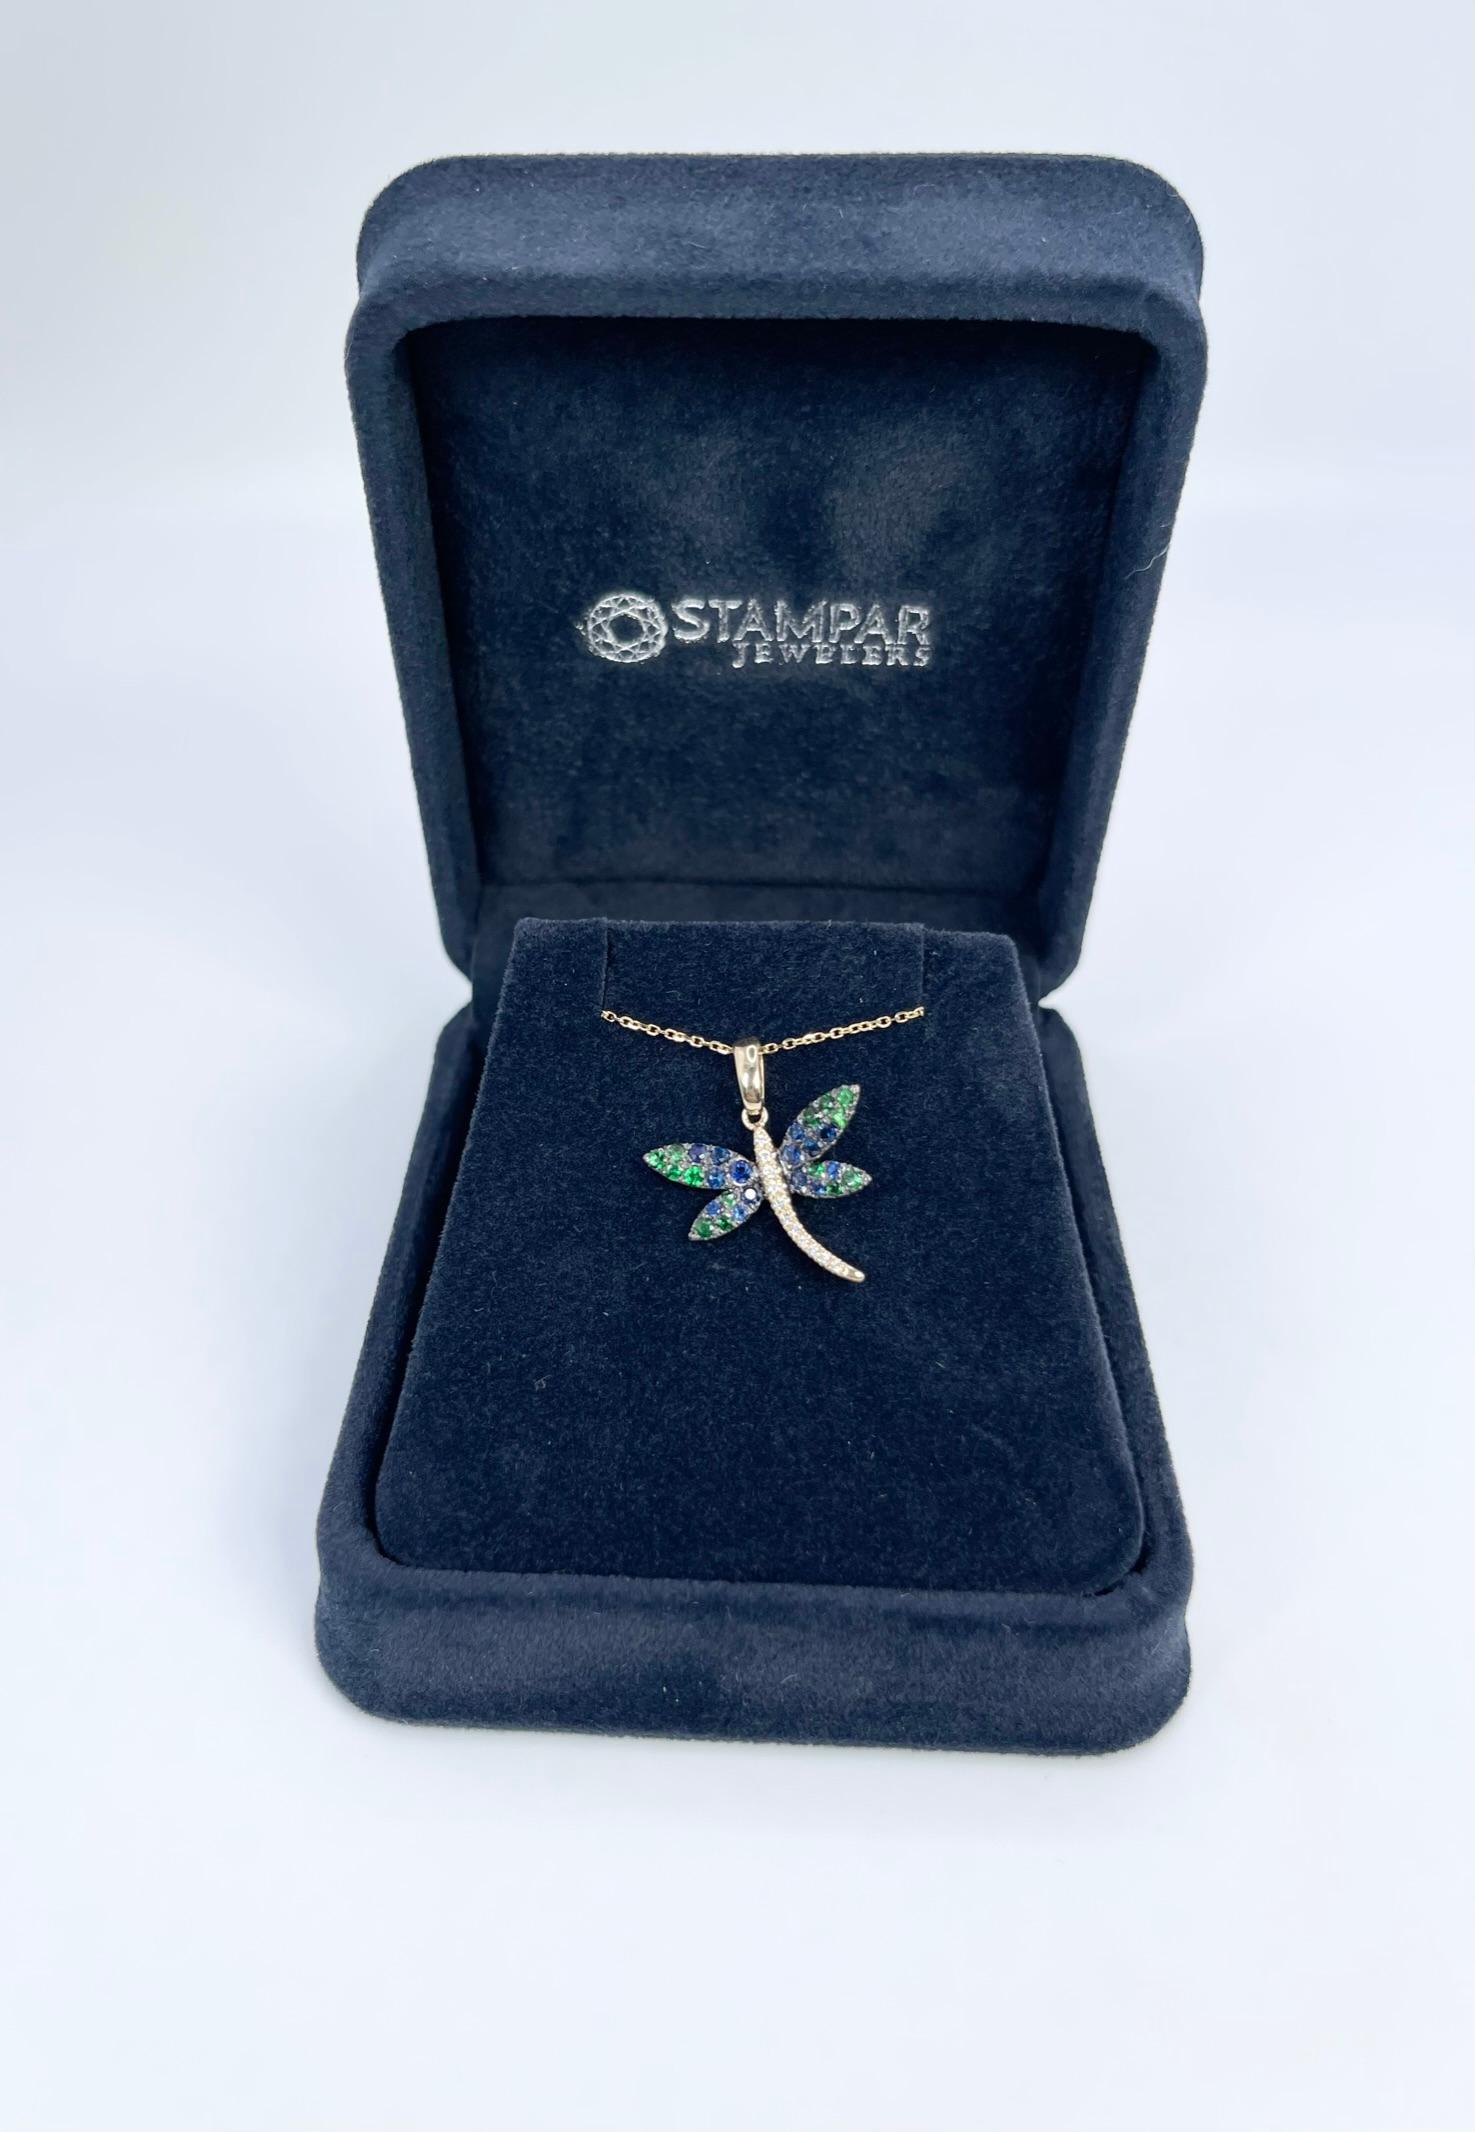 Charming dragonfly in 14KT yellow gold made with green garnets, blue sapphires and diamonds.
GRAM WEIGHT: 2.60gr
GOLD: 14KT yellow gold
SIZE: PENDANT (0.80